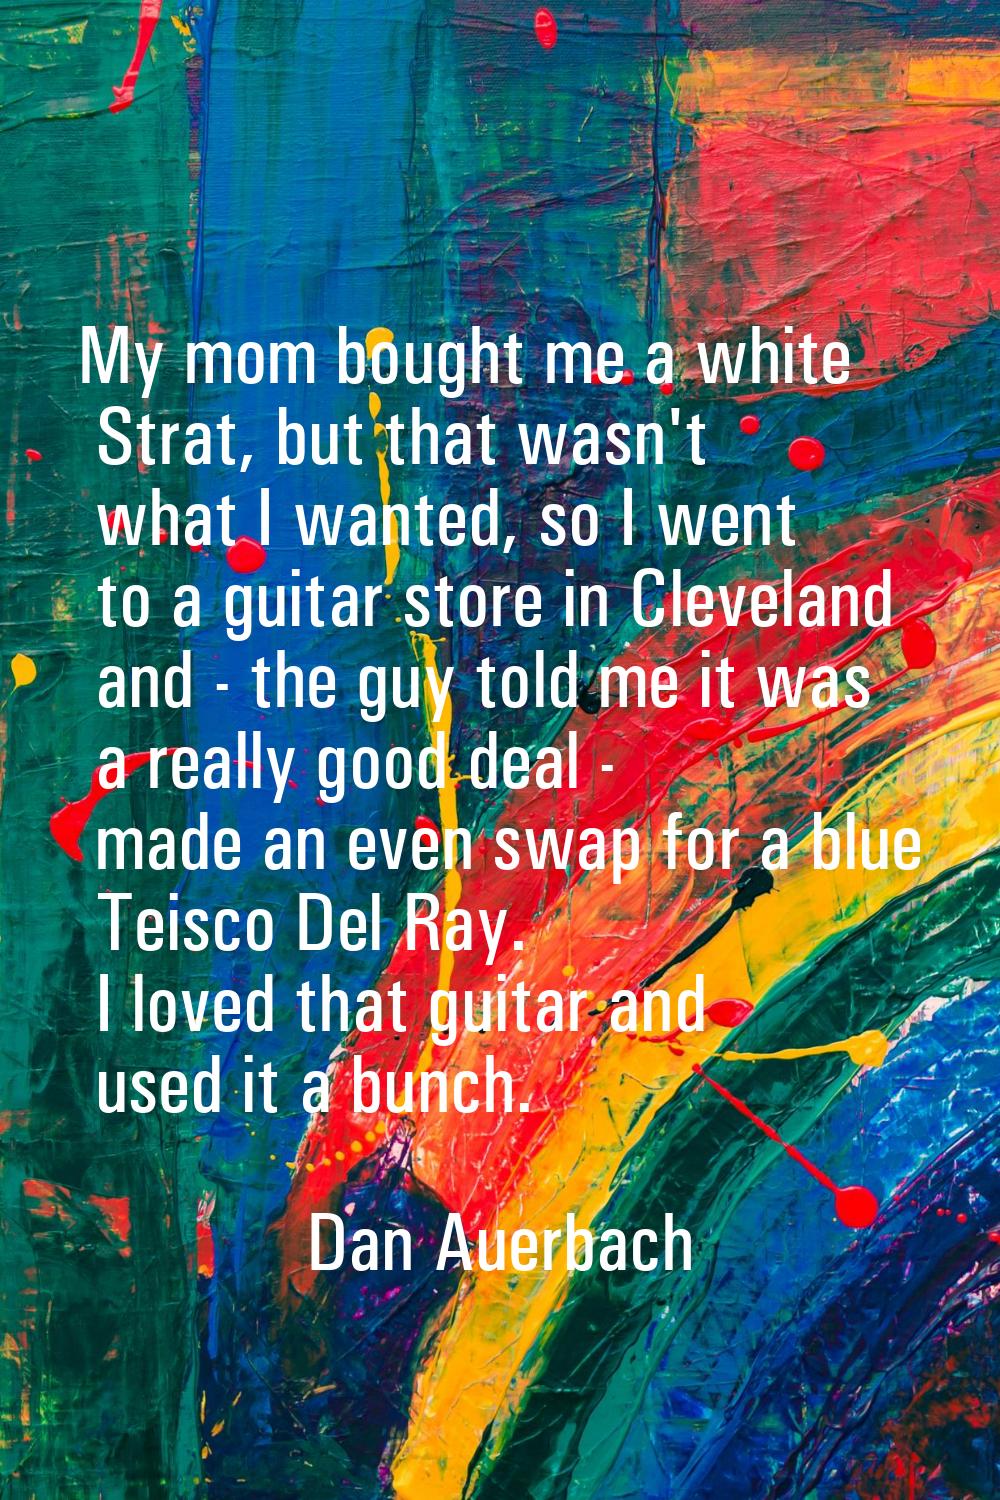 My mom bought me a white Strat, but that wasn't what I wanted, so I went to a guitar store in Cleve